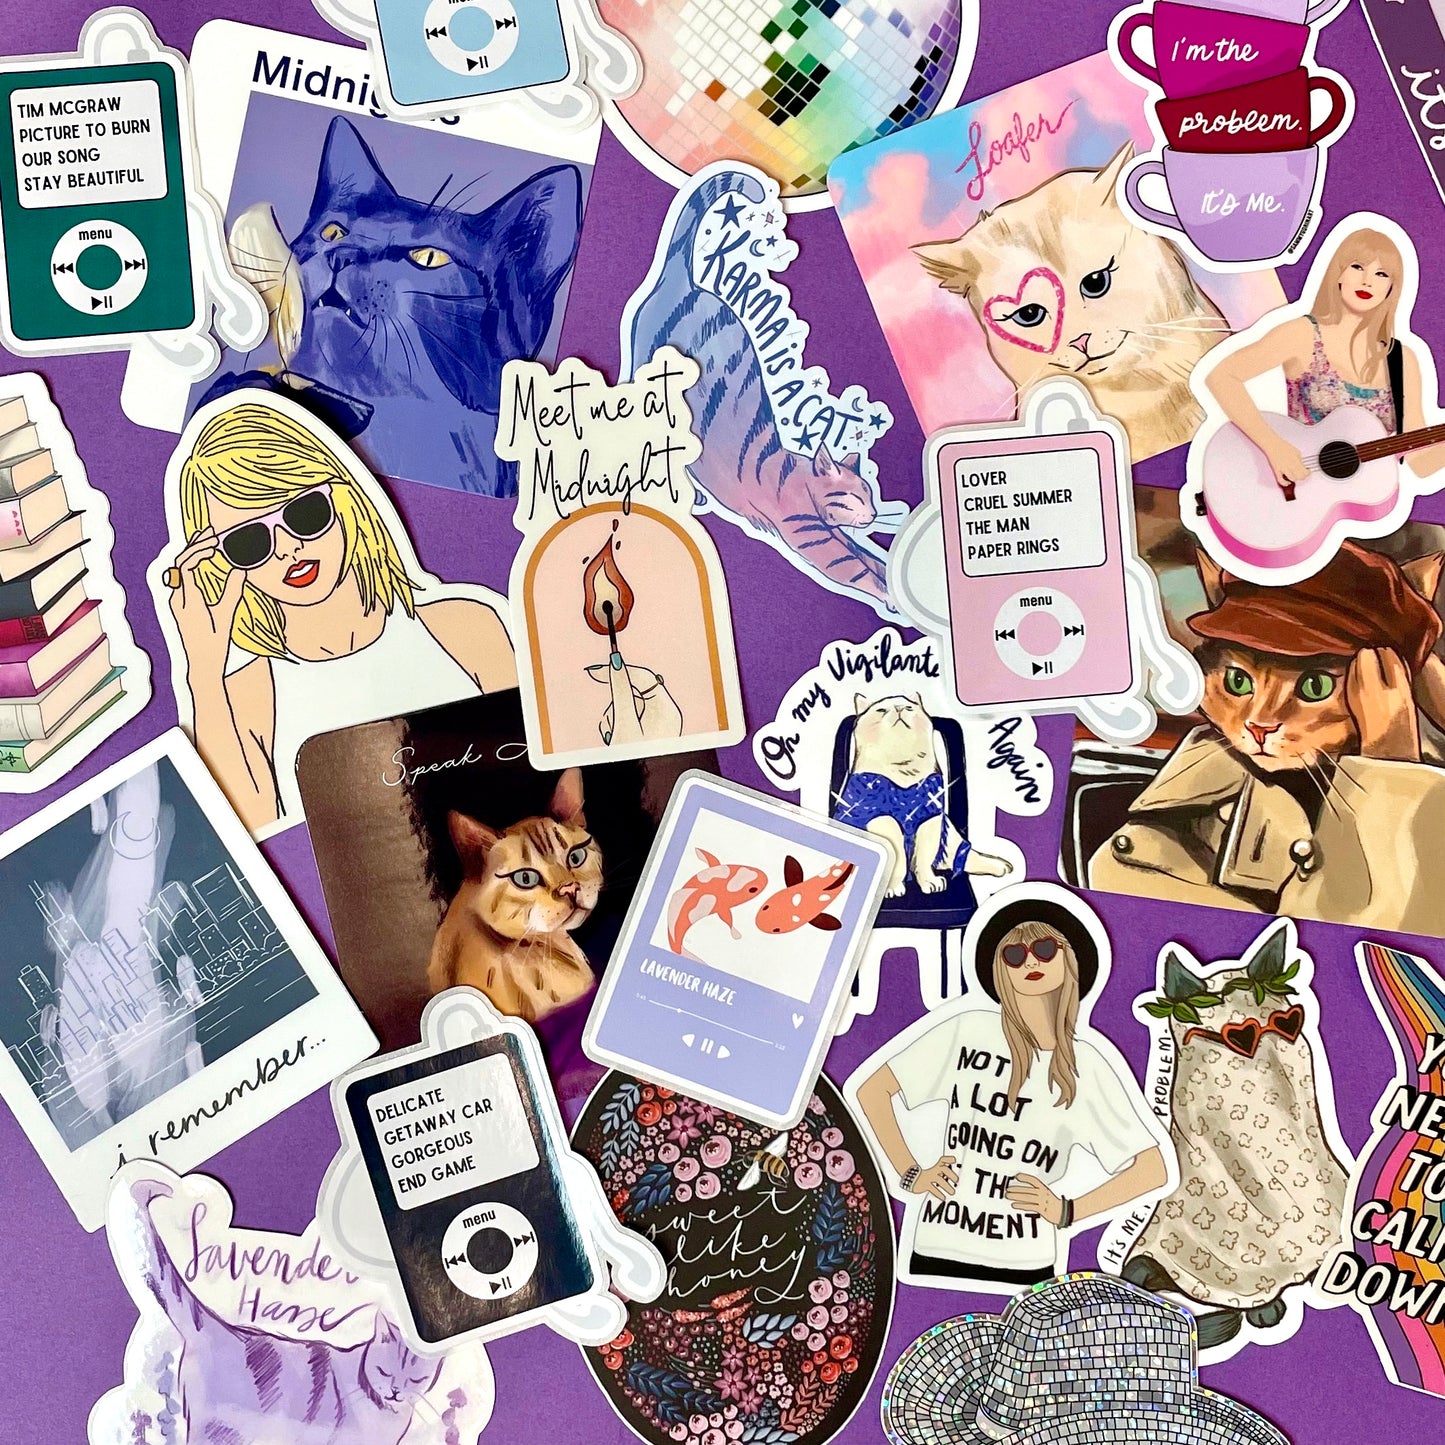 Not a Lot Going On at the Moment Sticker (Taylor Swift)